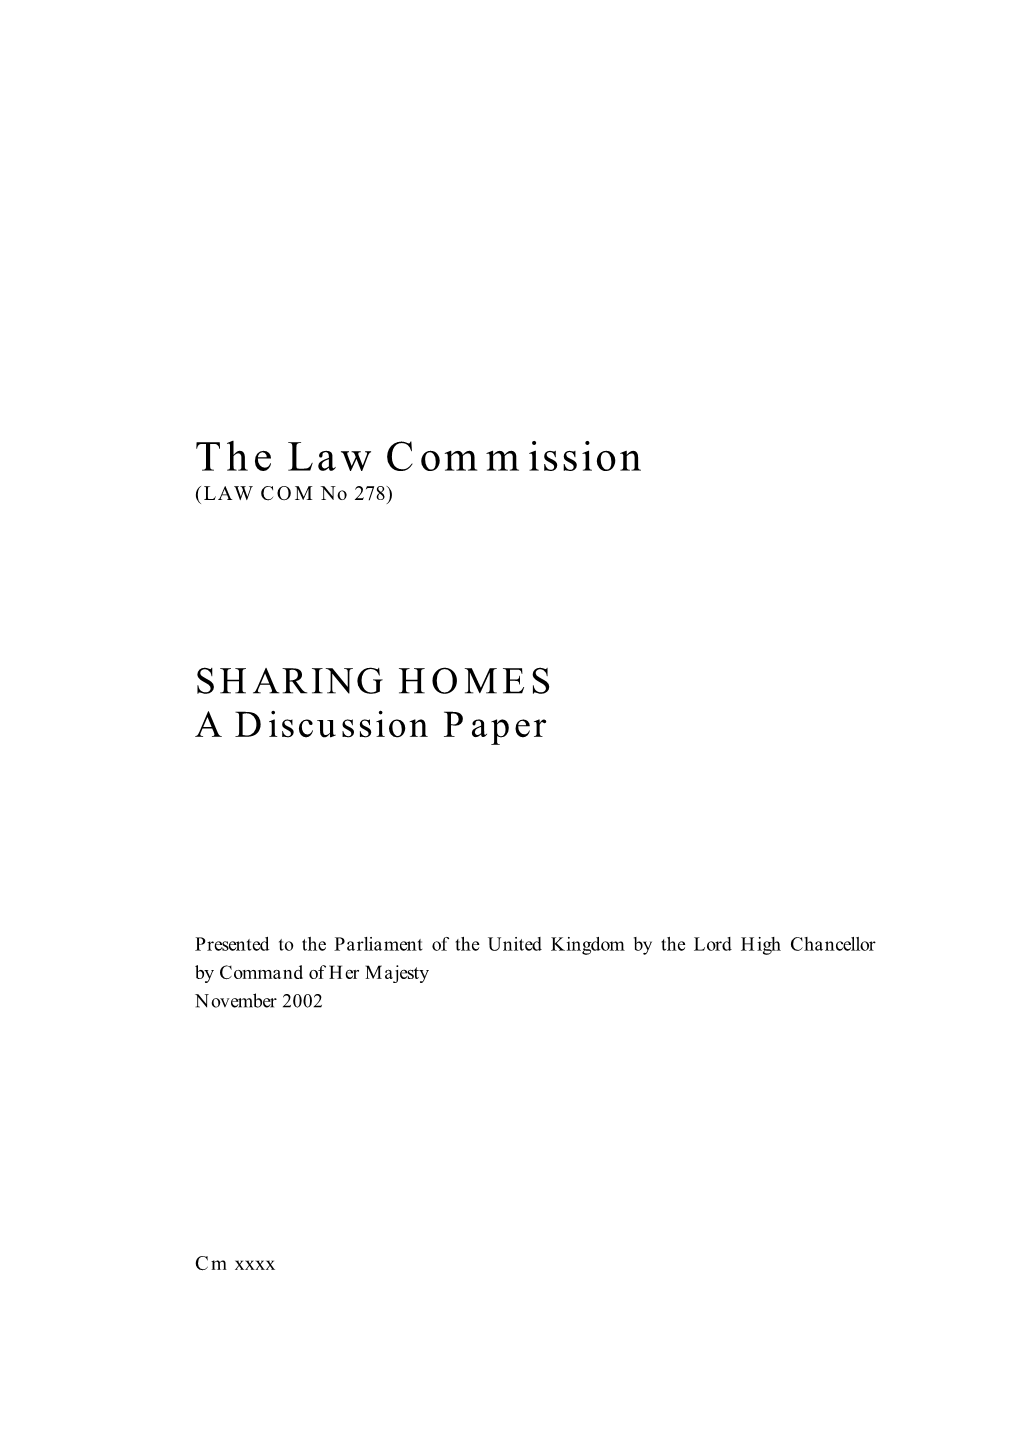 Sharing Homes: a Discussion Paper